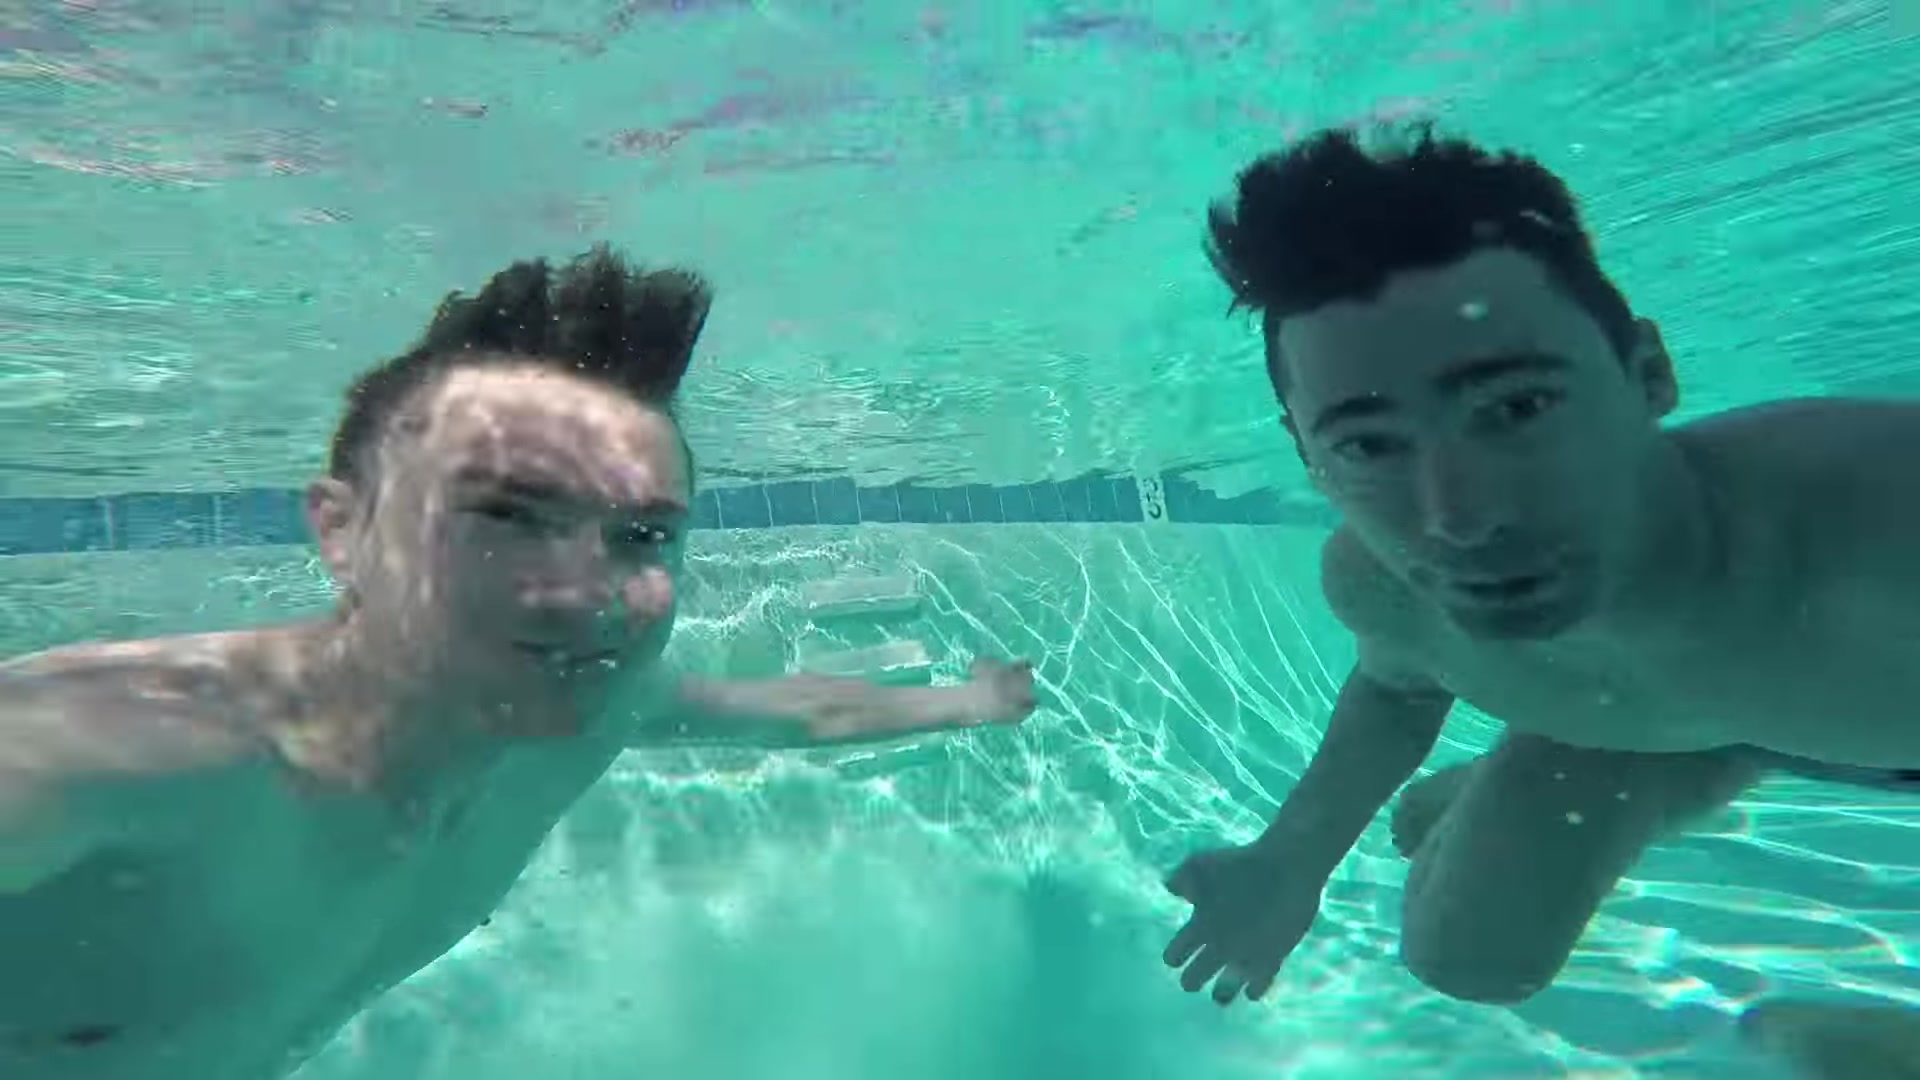 Gay french cuties barefaced underwater in pool